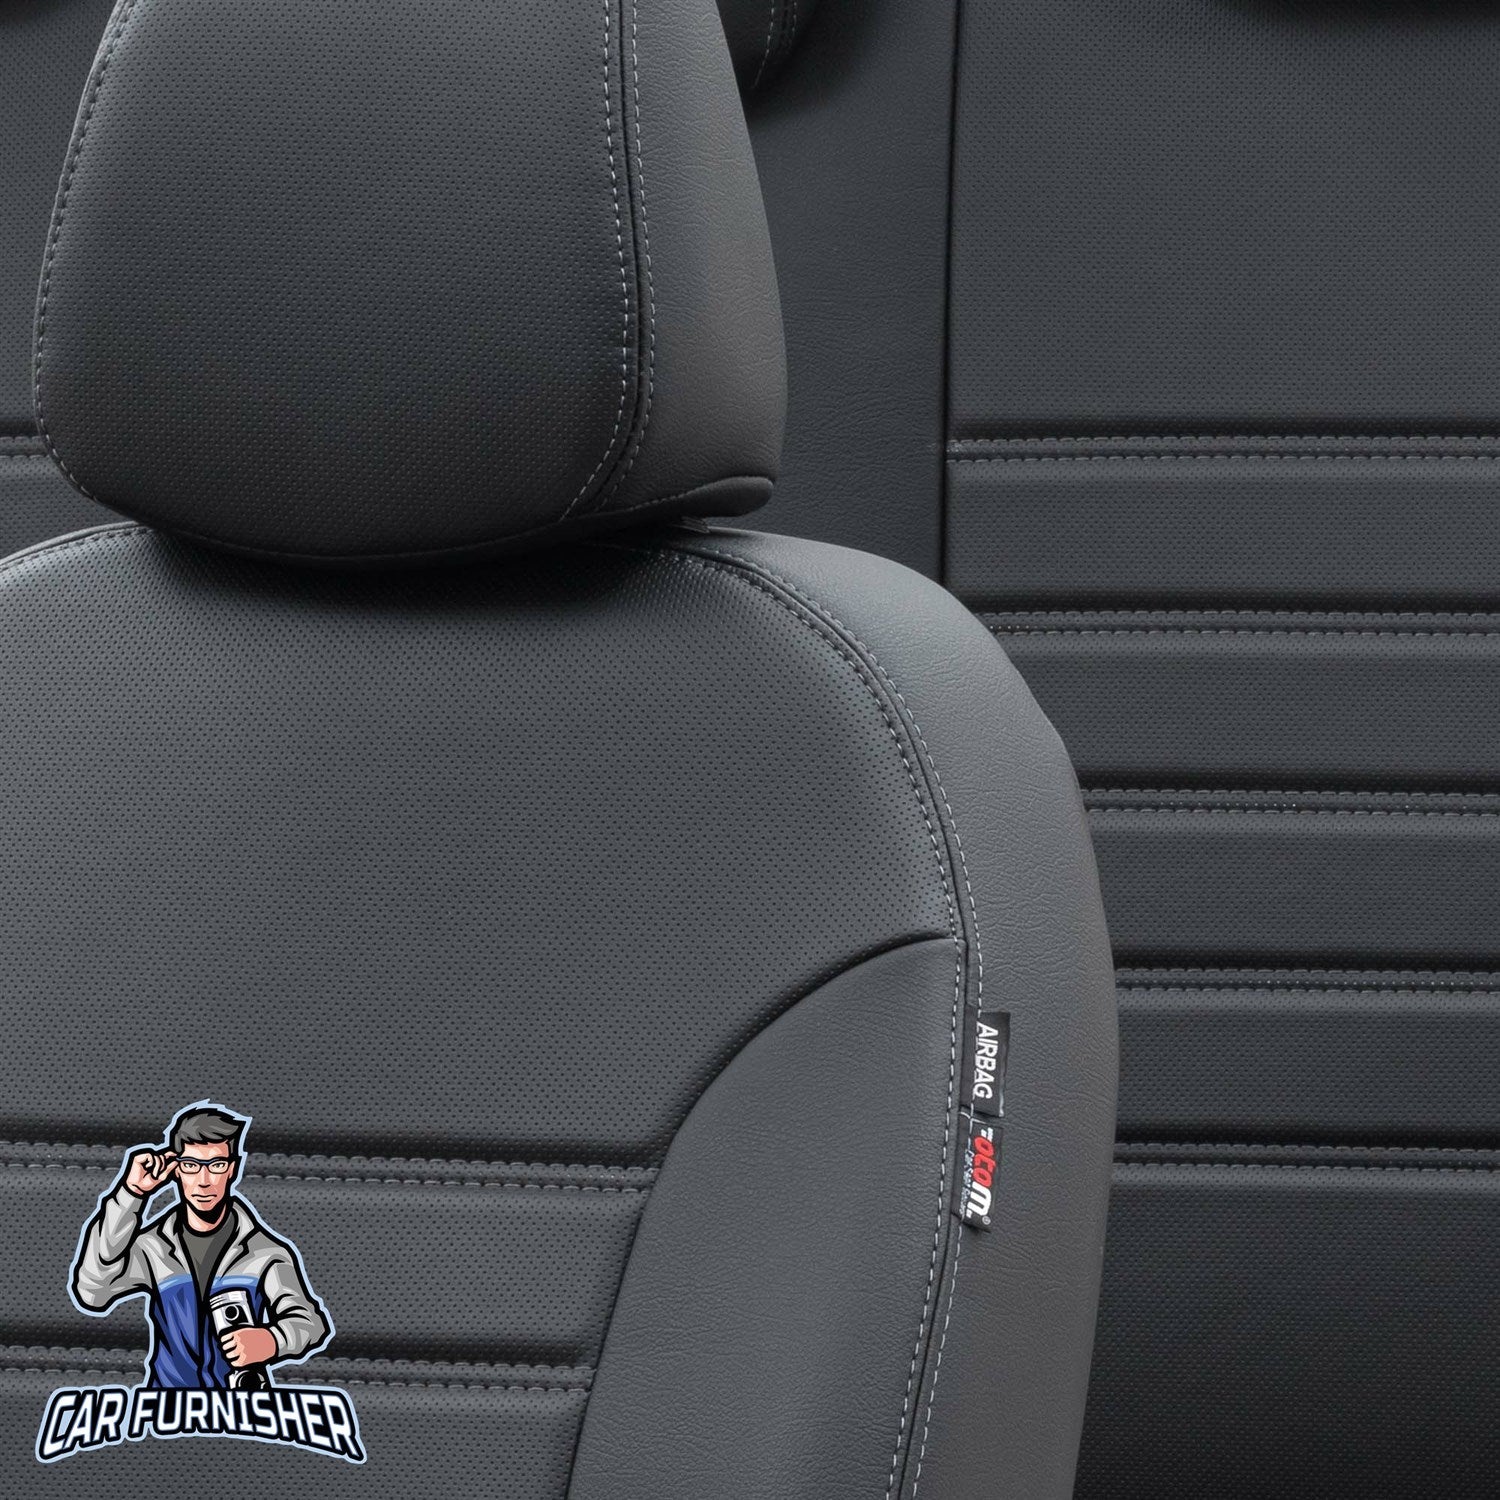 Mercedes X-Class Seat Covers Istanbul Leather Design Black Leather